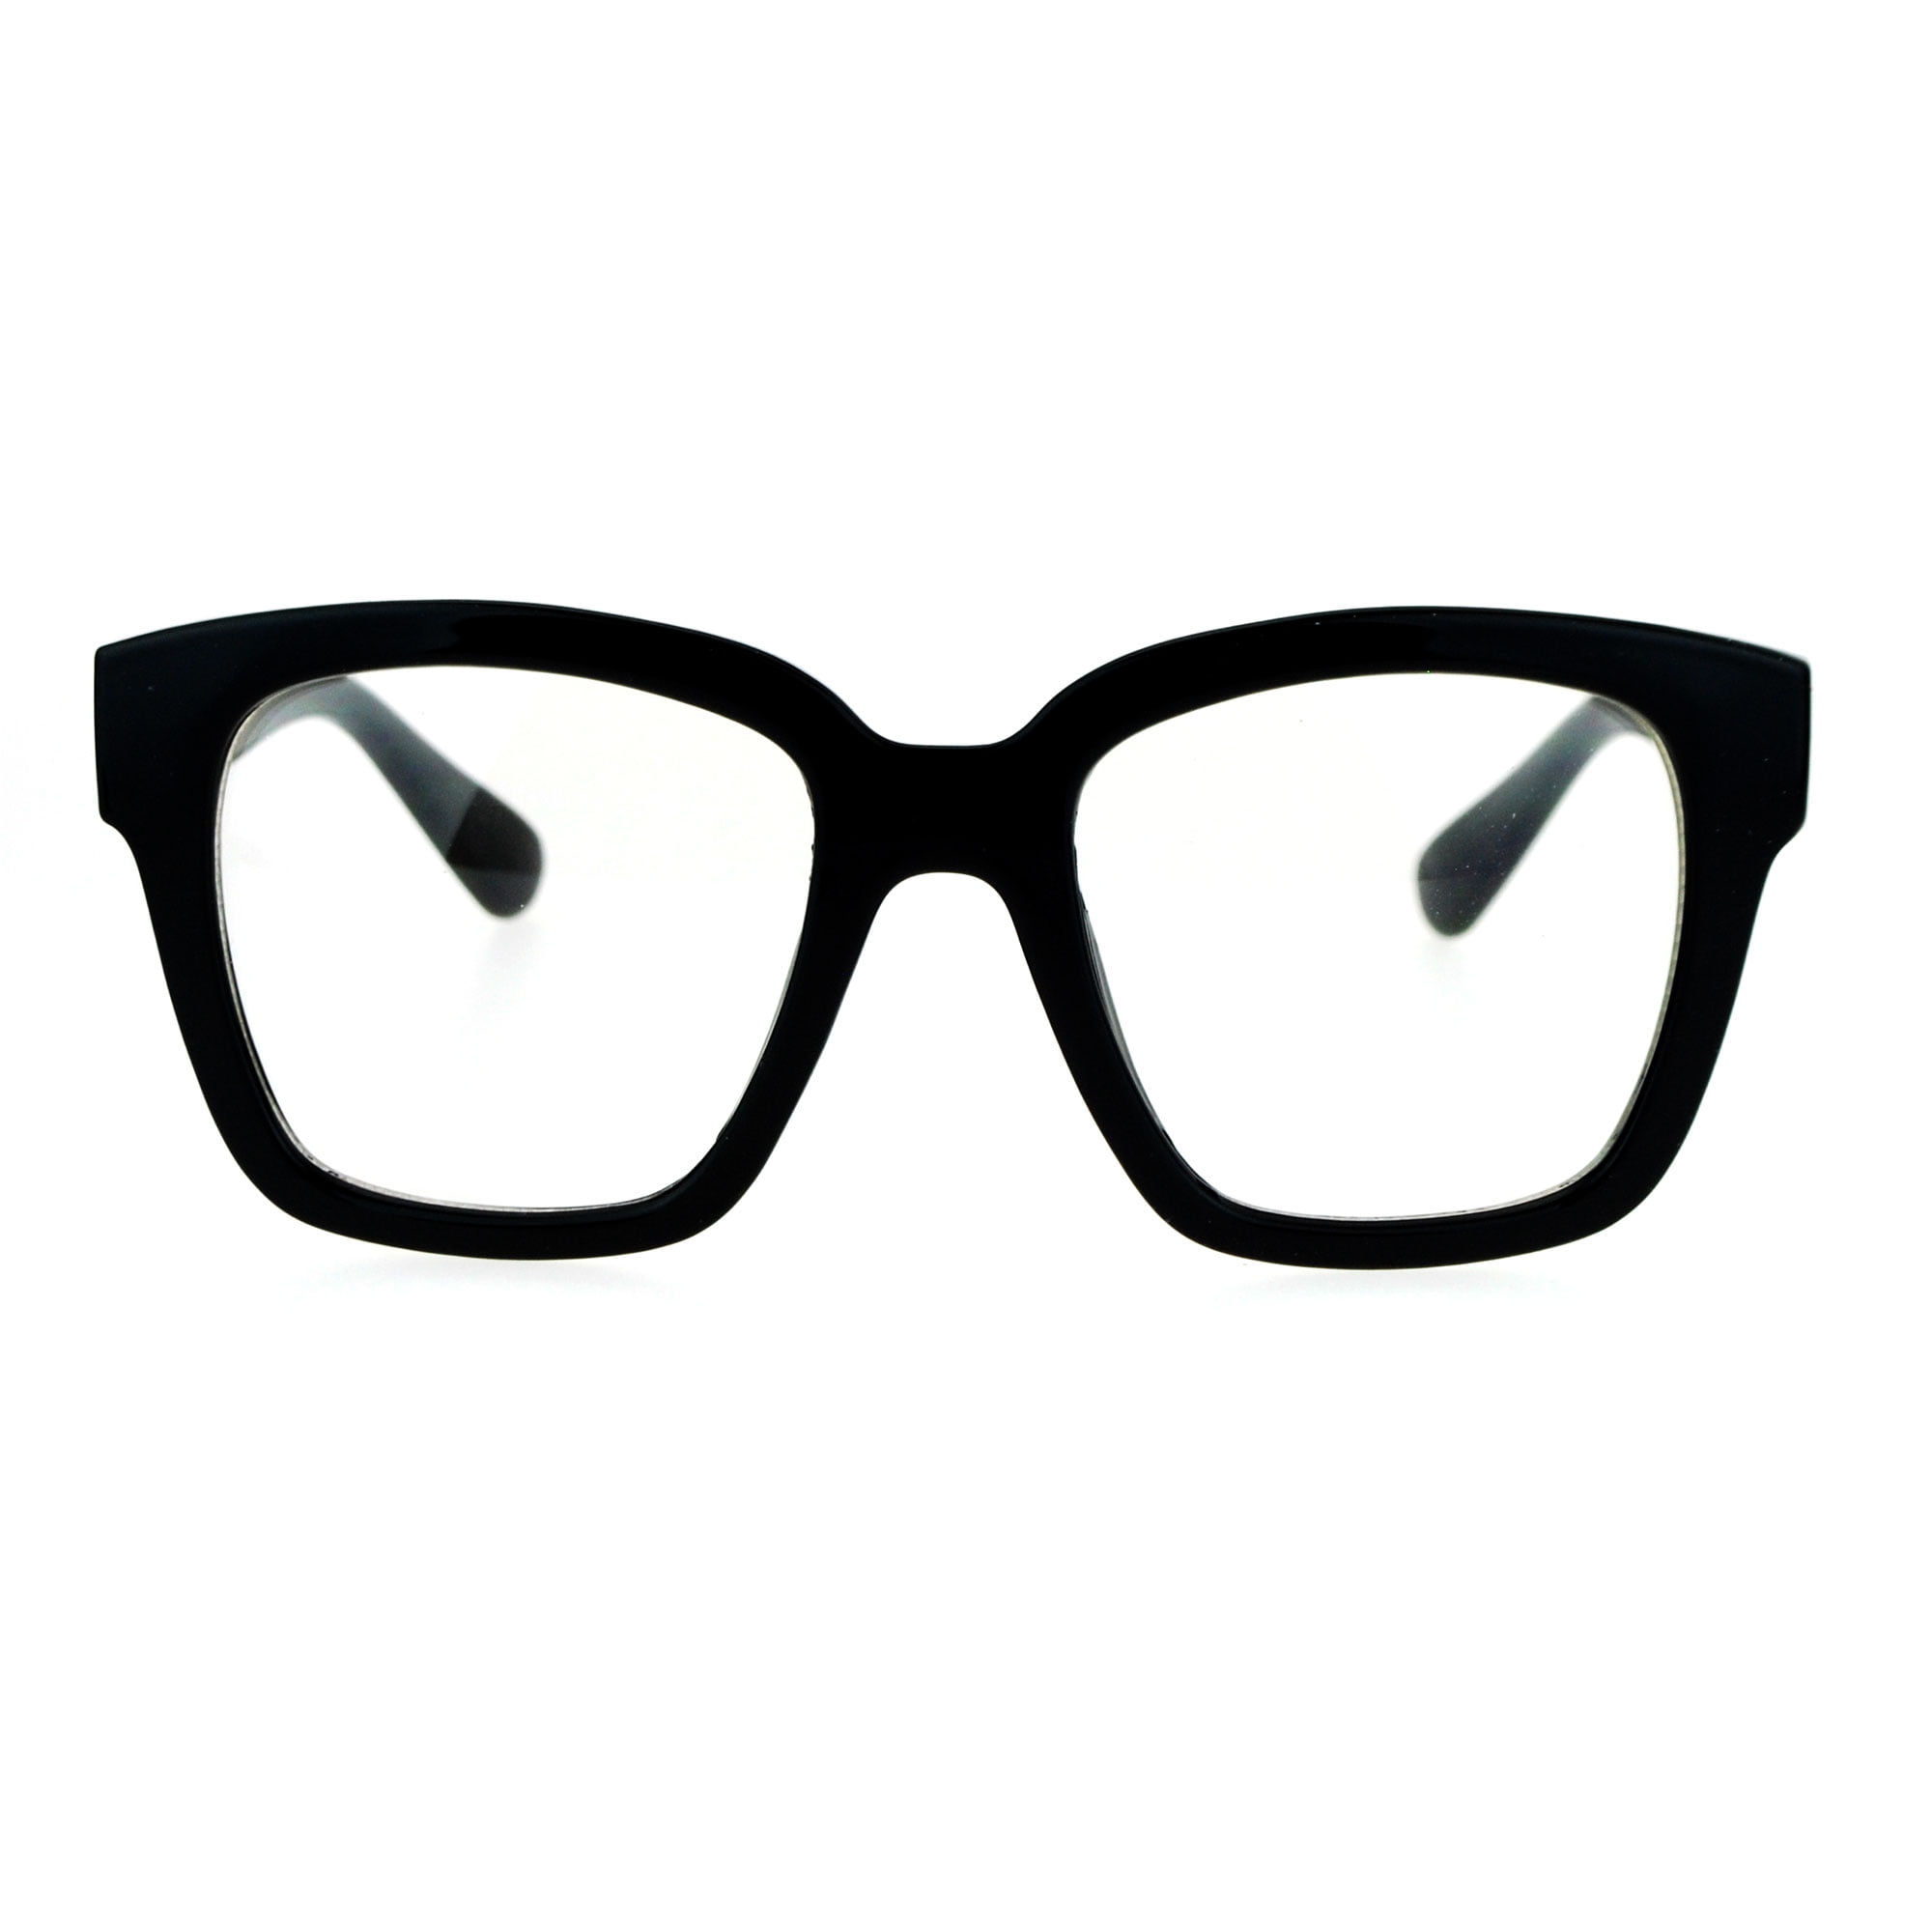 Oversized Square Sunglasses Flat Top Thick Nerdy Hipster Frame 